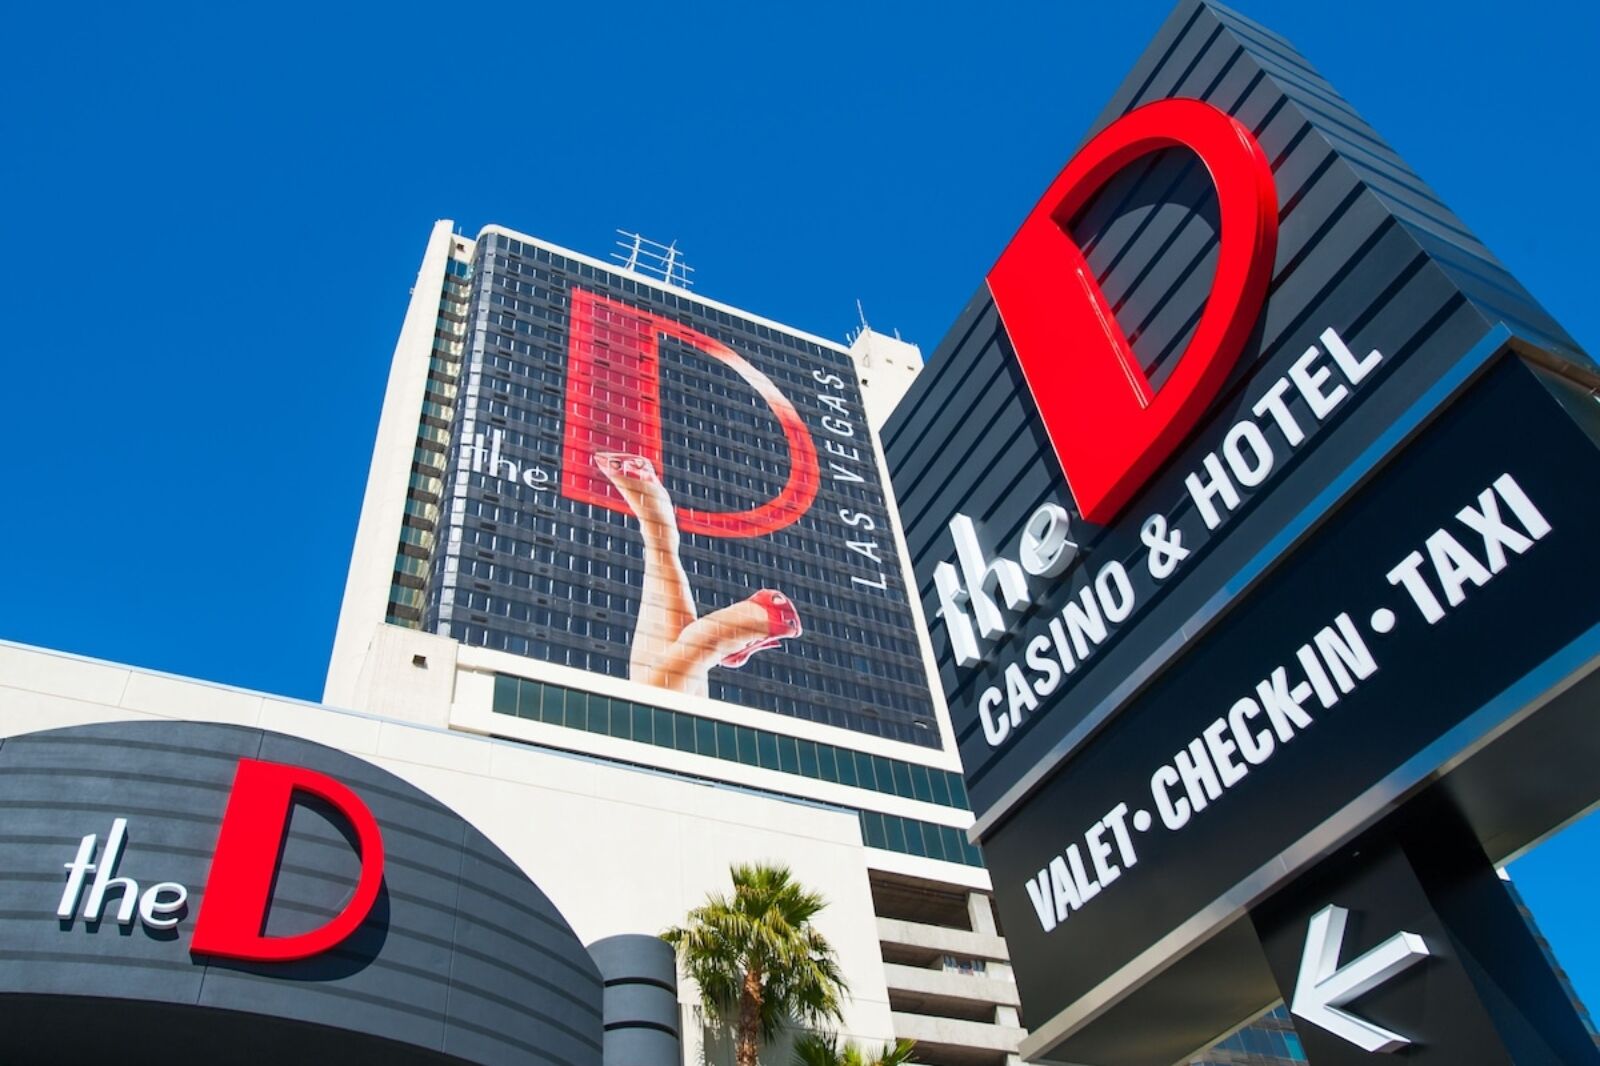 External photo of The D hotel one of the best places to stay in Las Vegas 